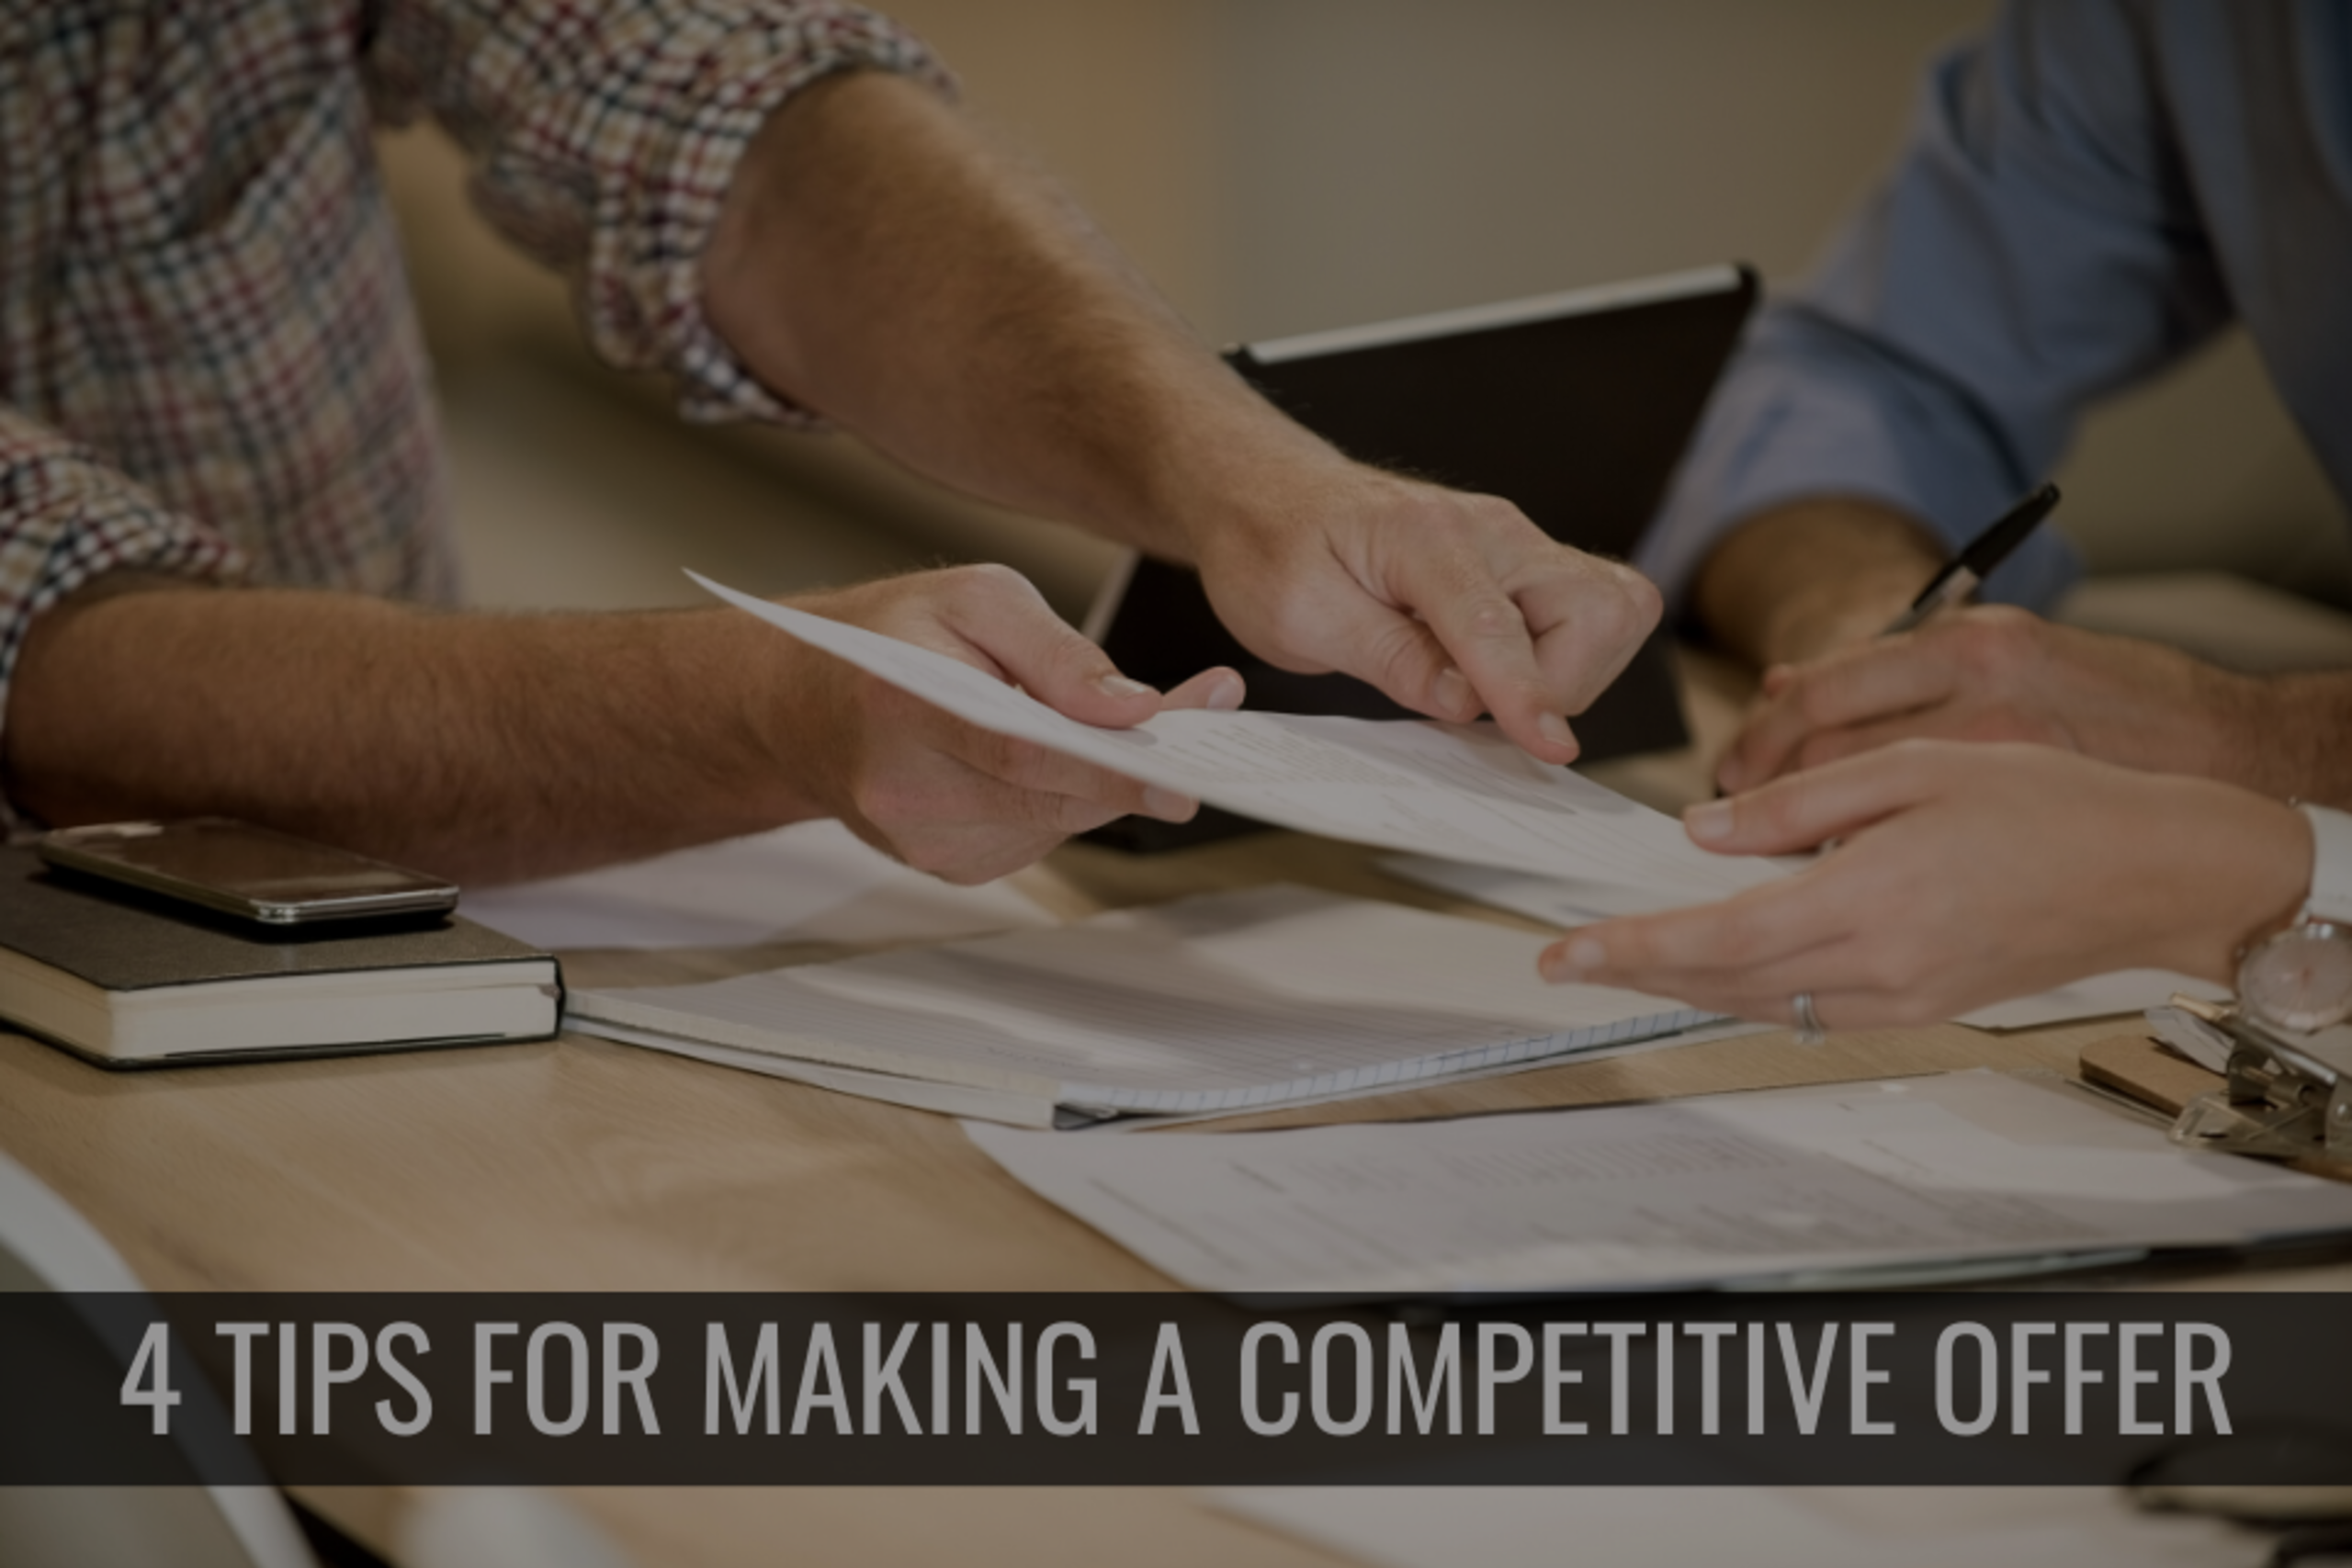 4 Tips For Making a Competitive Offer